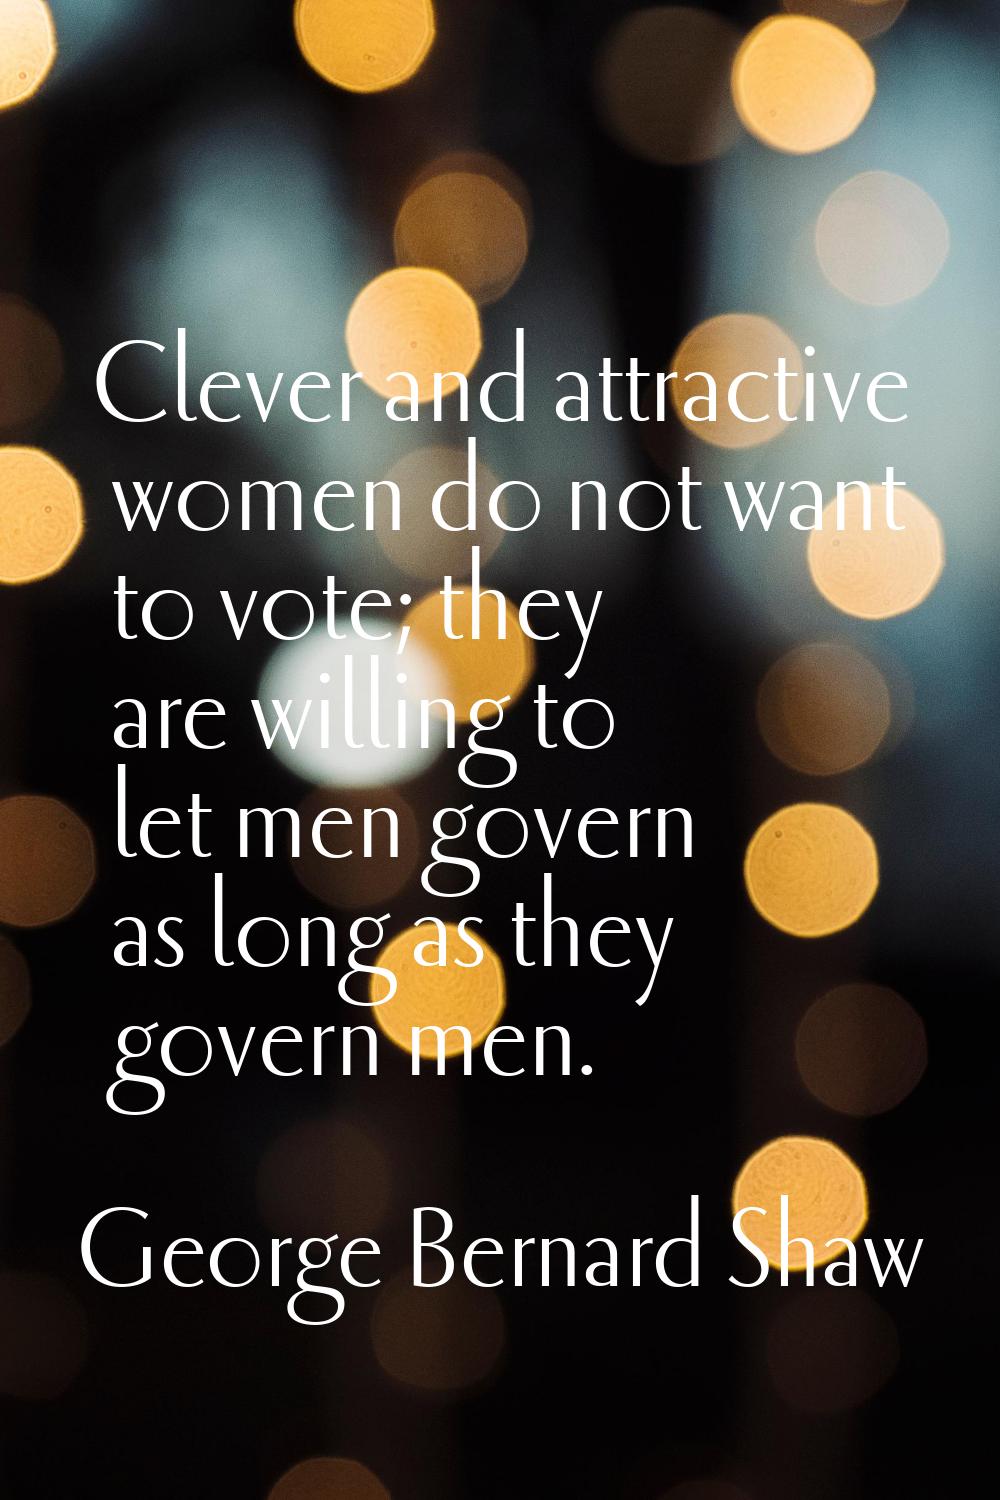 Clever and attractive women do not want to vote; they are willing to let men govern as long as they